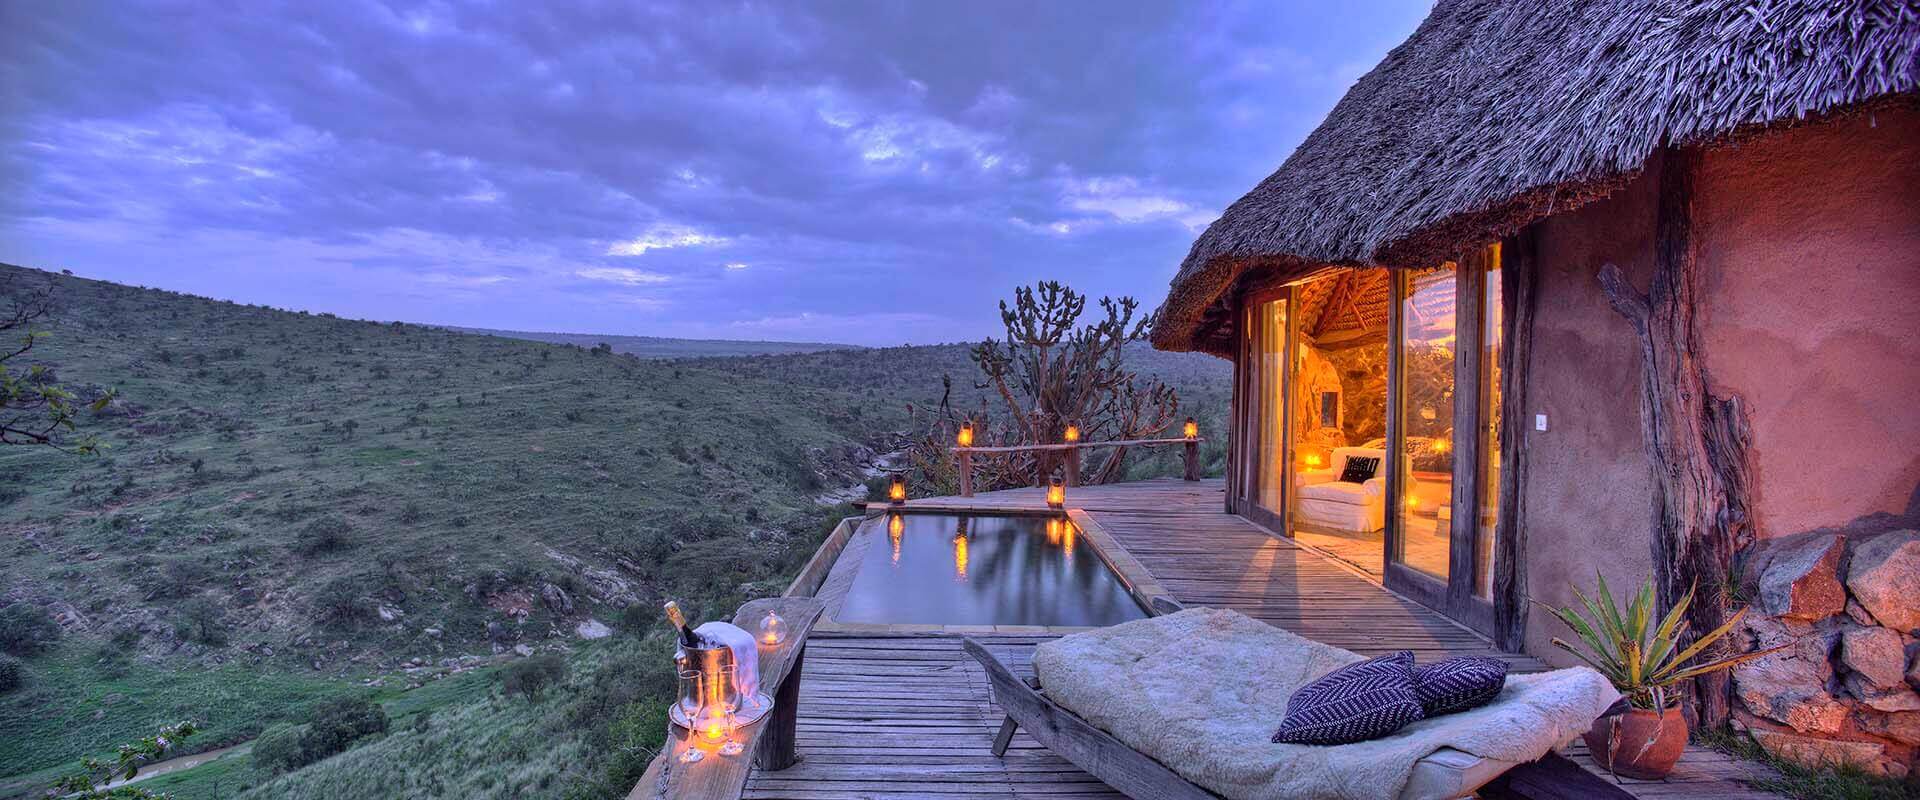 Base yourself at Borana Lodge for the ultimate horsey escape in vast, varied, wilderness.